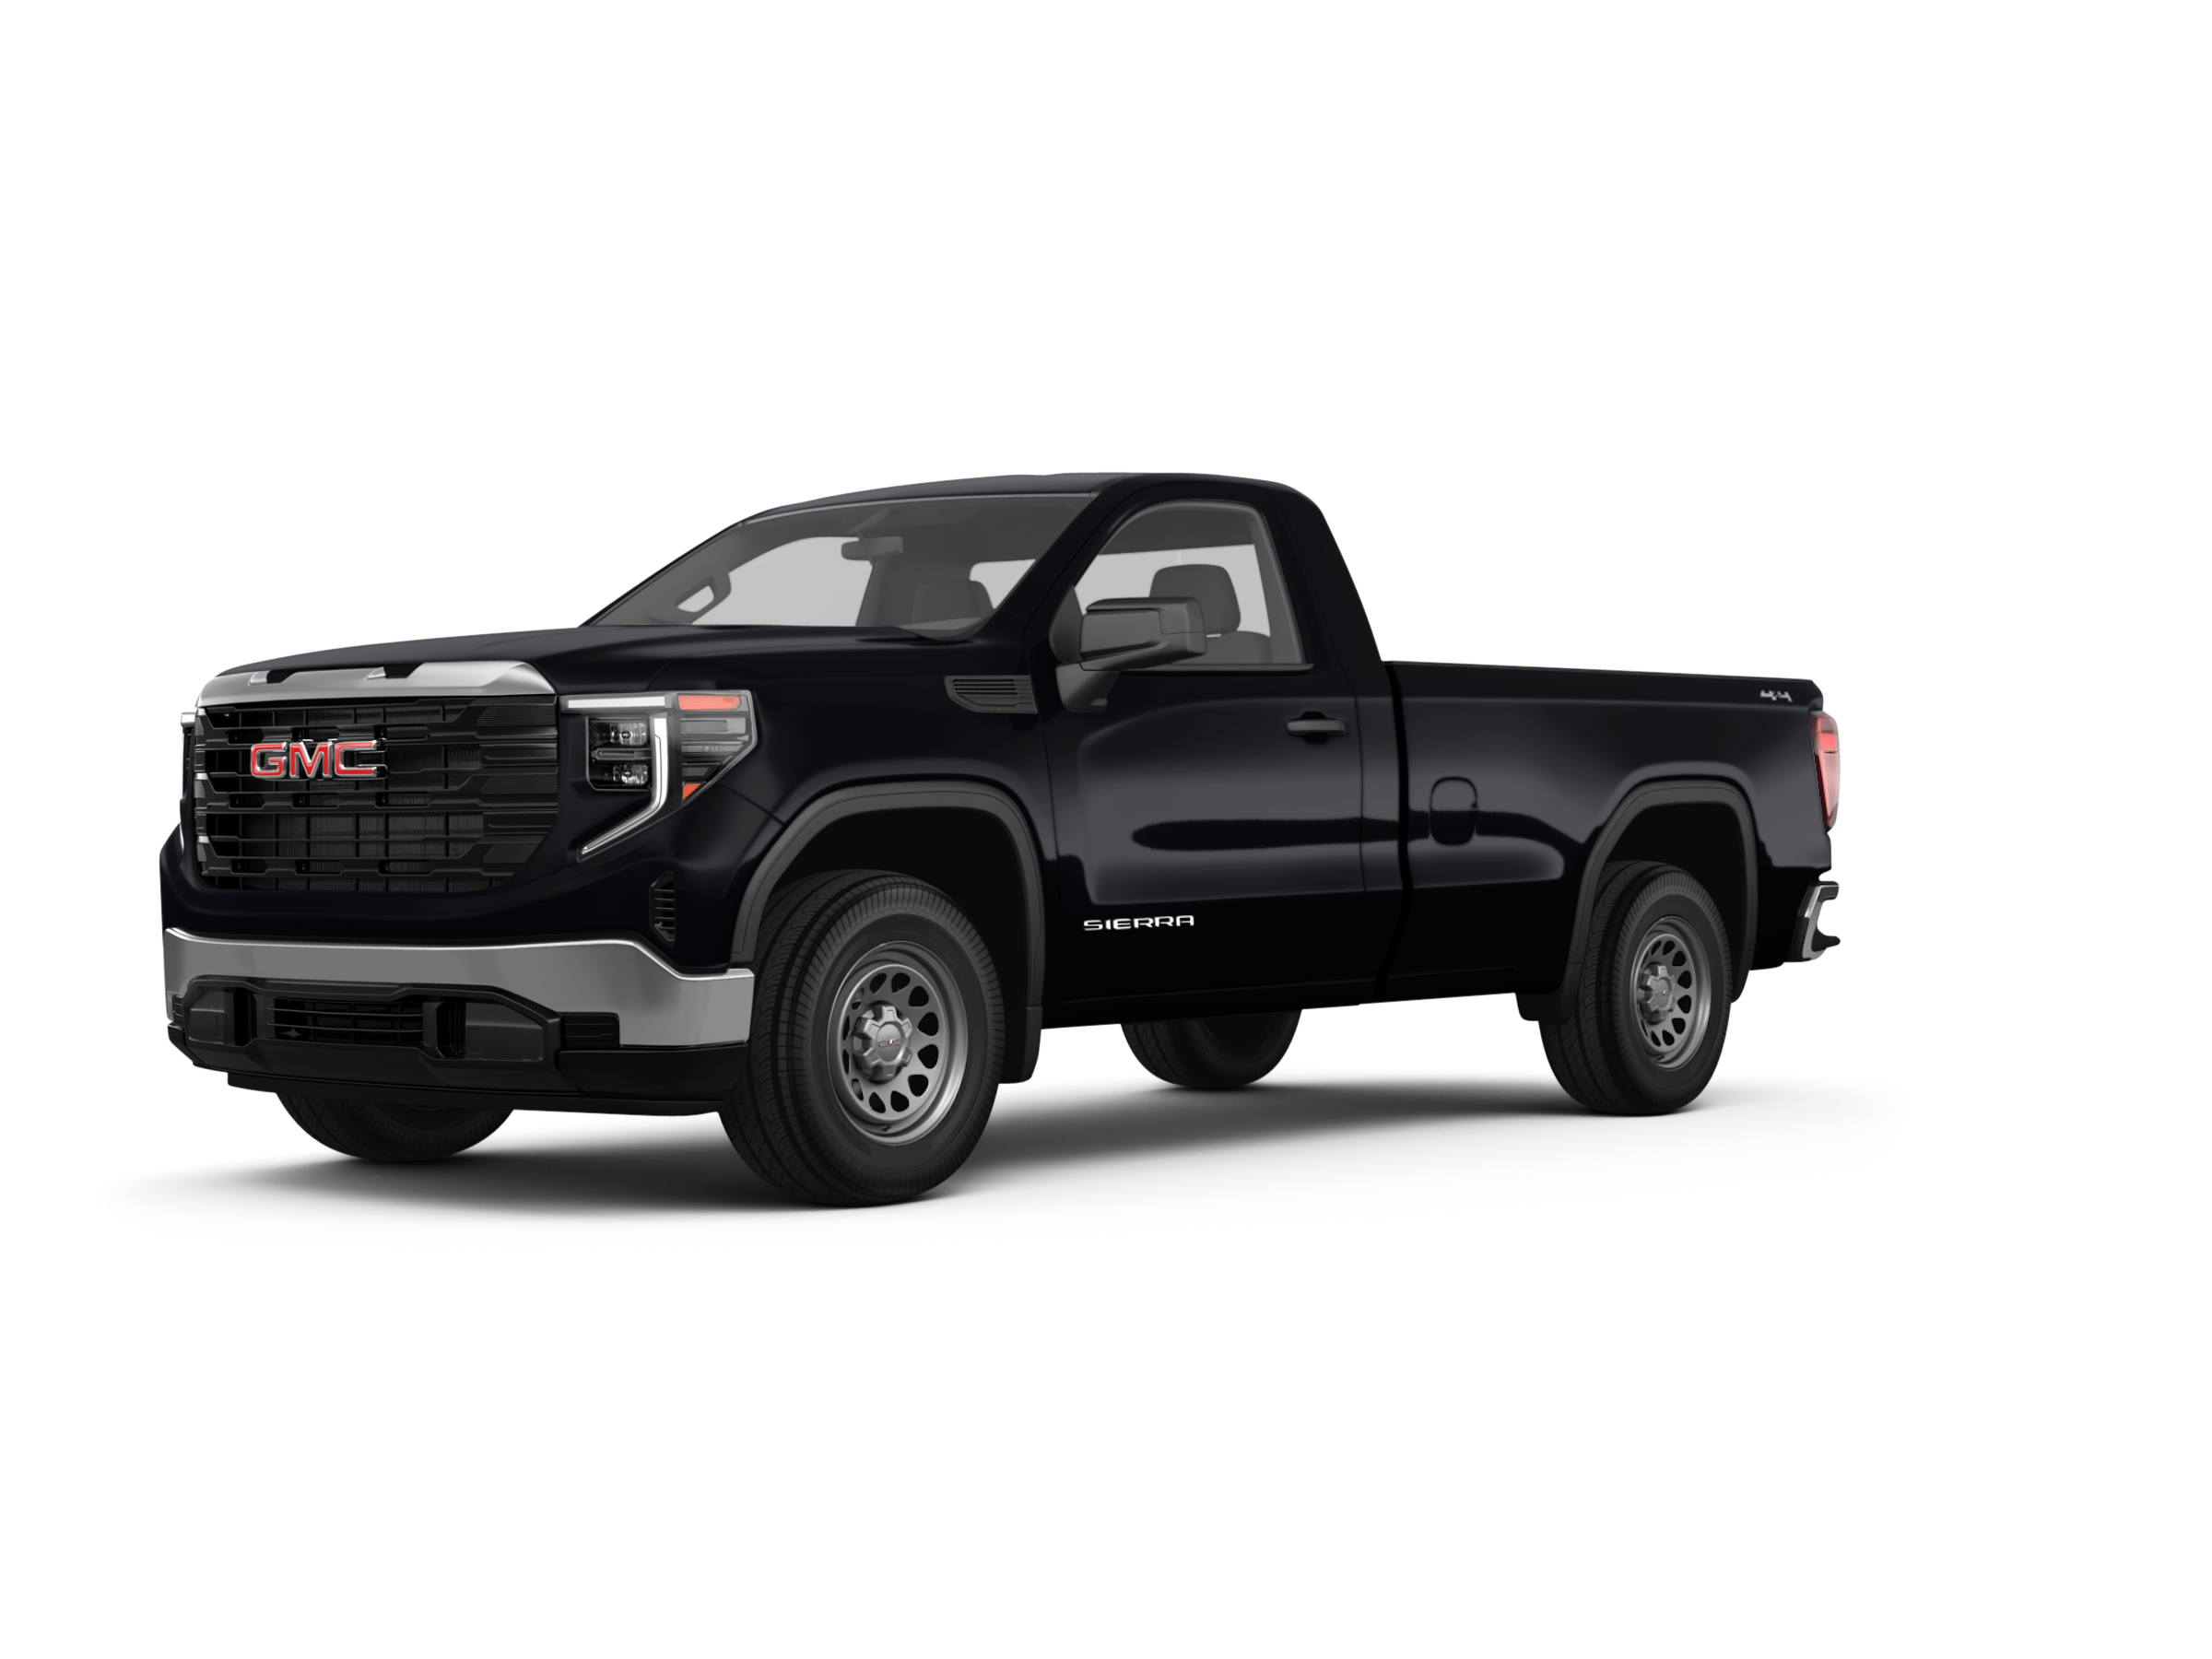 2023 GMC Sierra 1500 Regular Cab Price, Reviews, Pictures & More